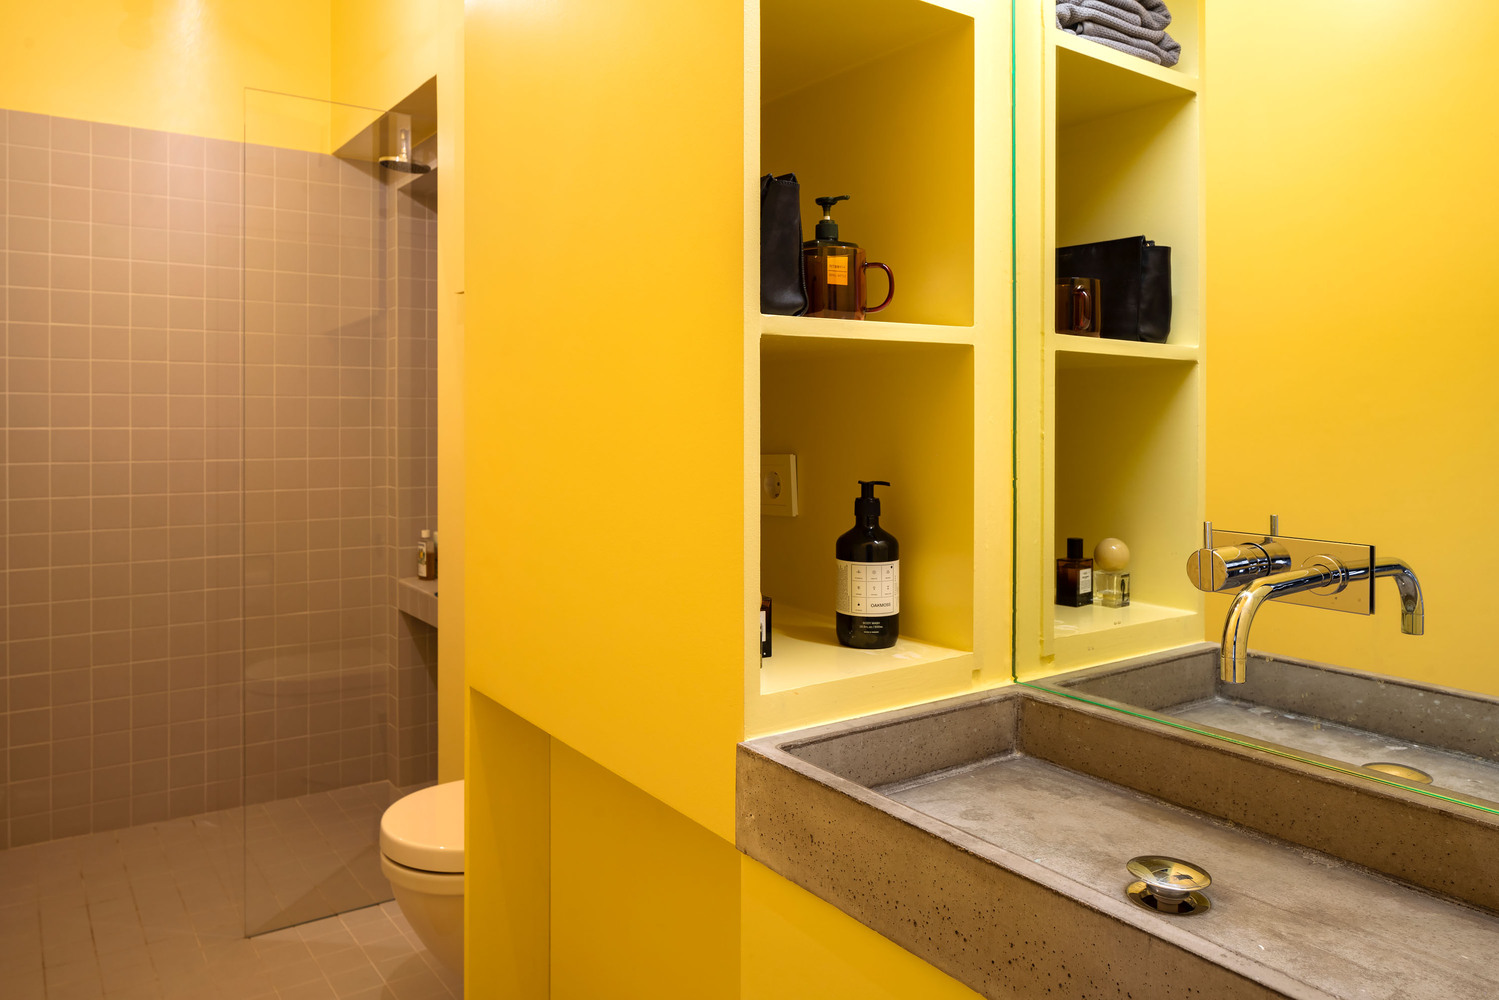 The bathroom combines yellow and greys - grey tiles and a concrete sink